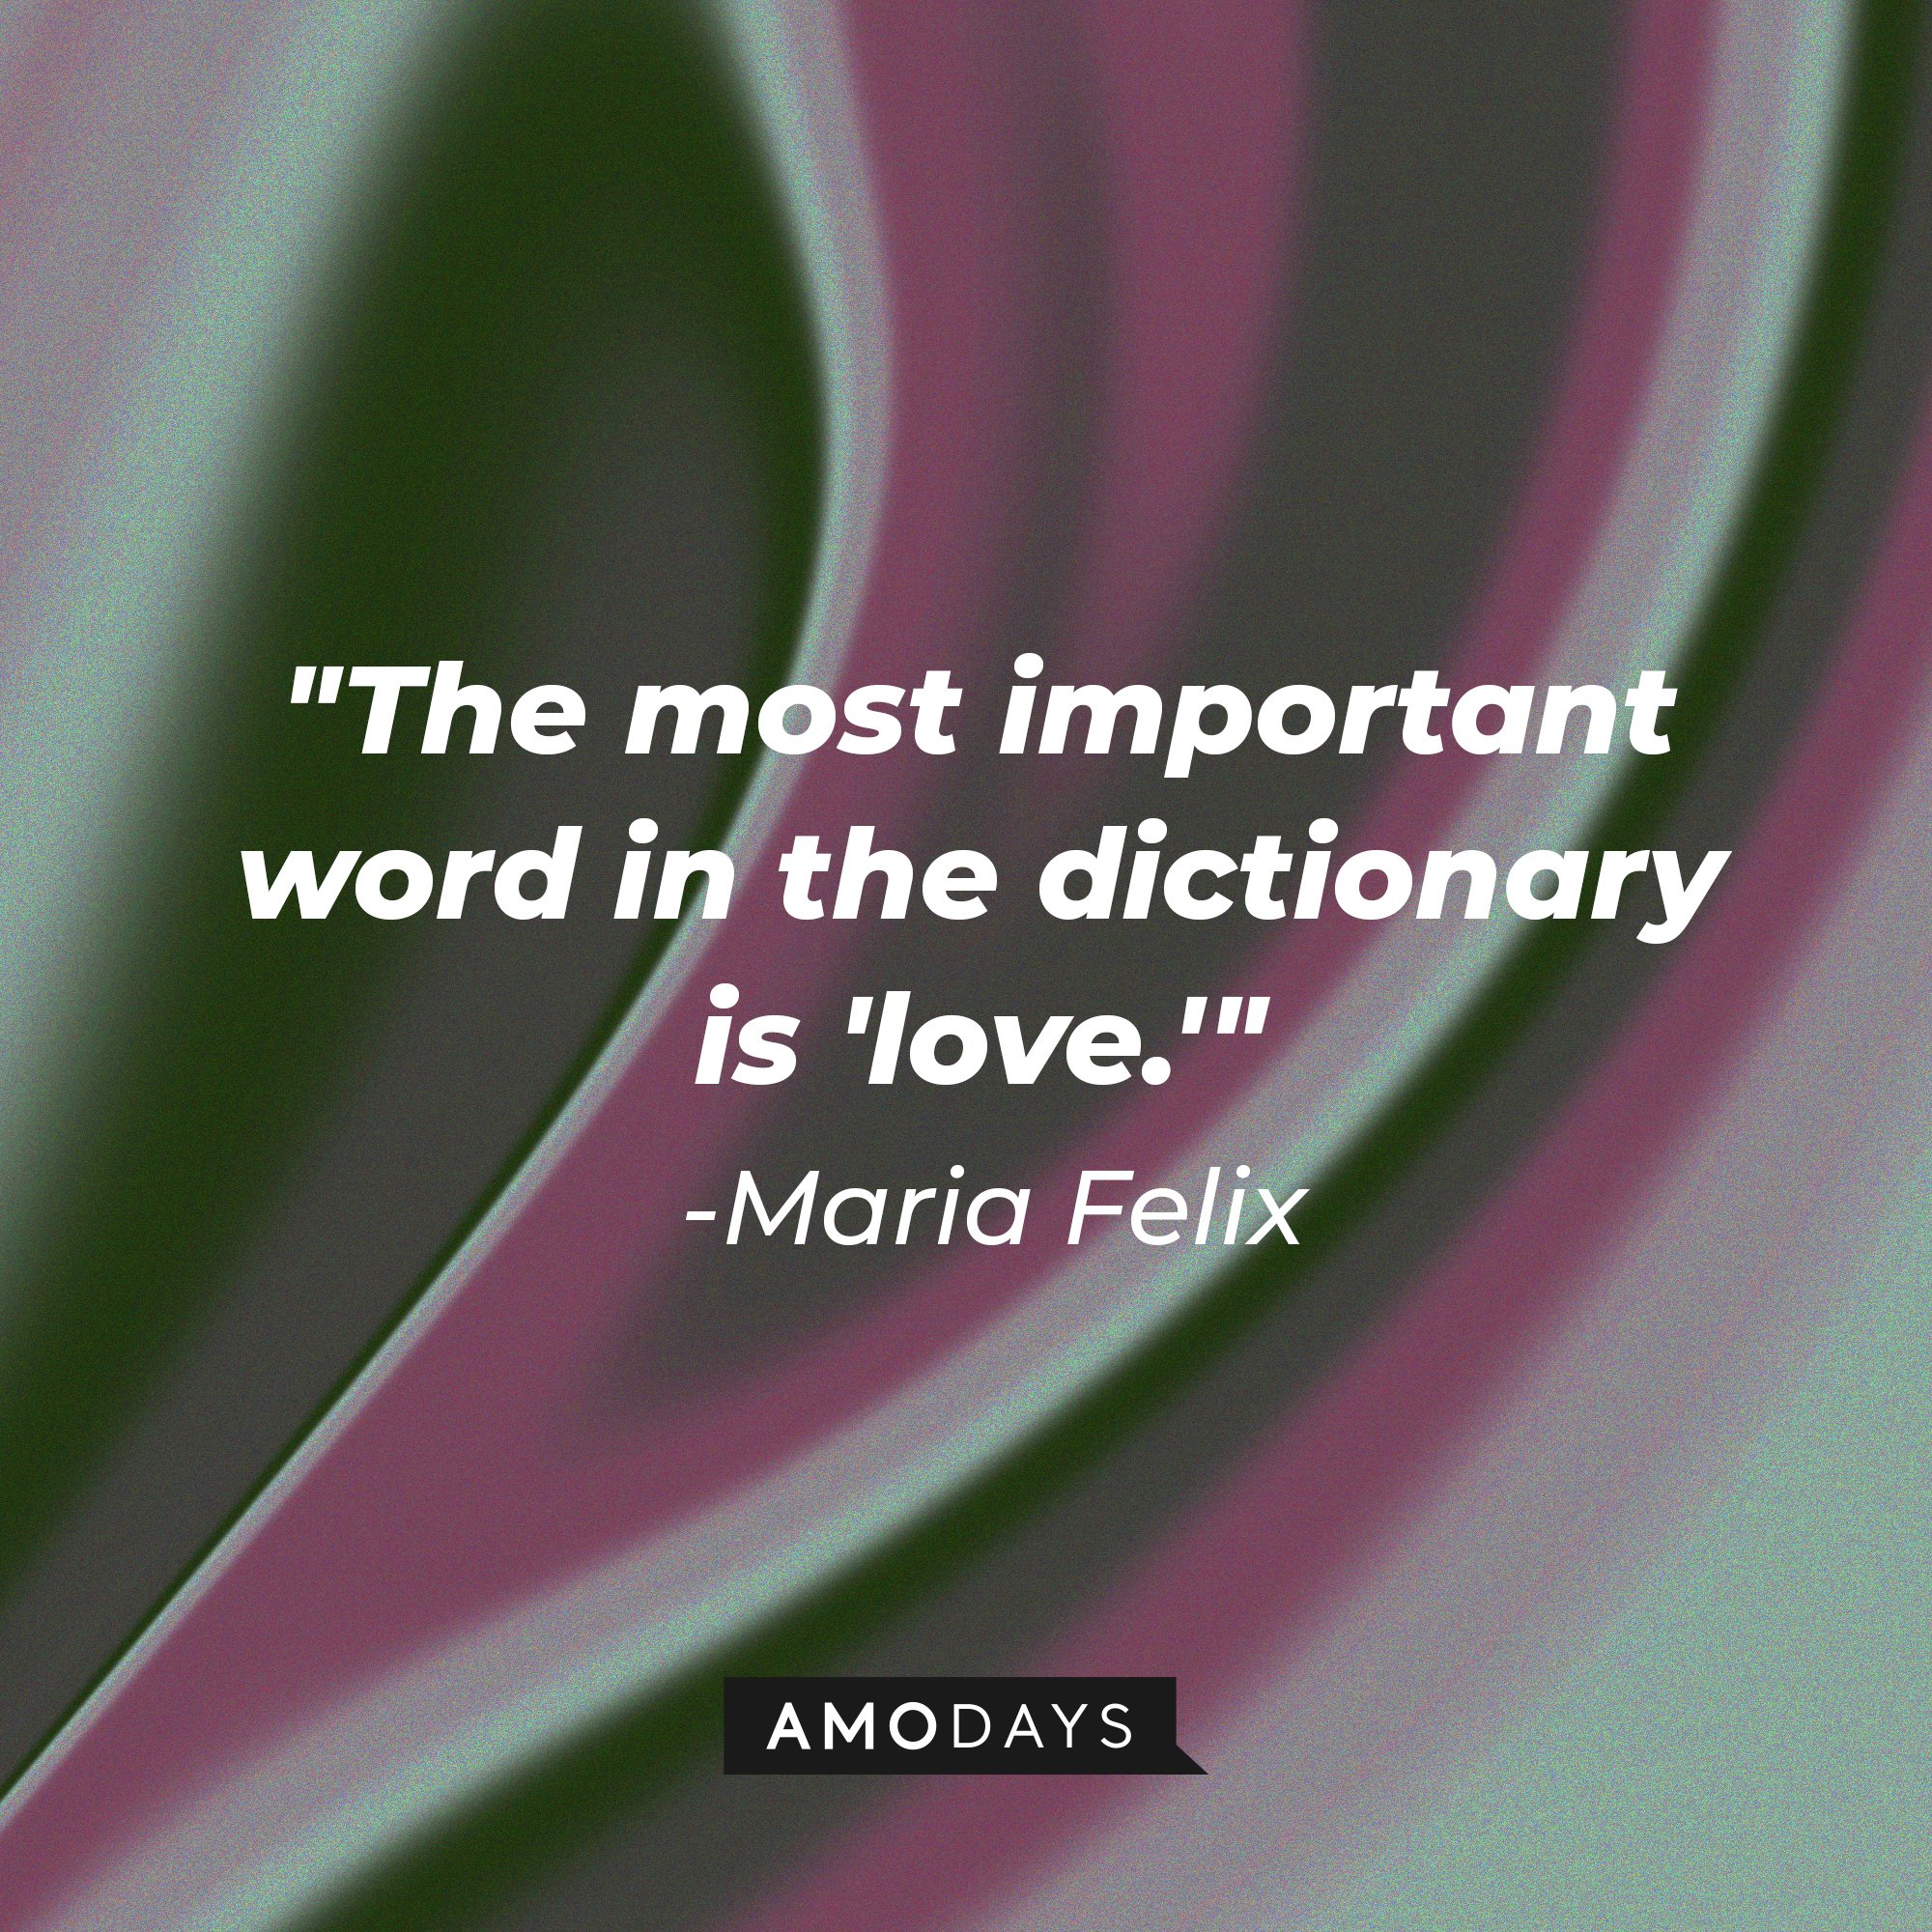 Maria Felix’s quote: "The most important word in the dictionary is 'love.'" | Image: AmoDays